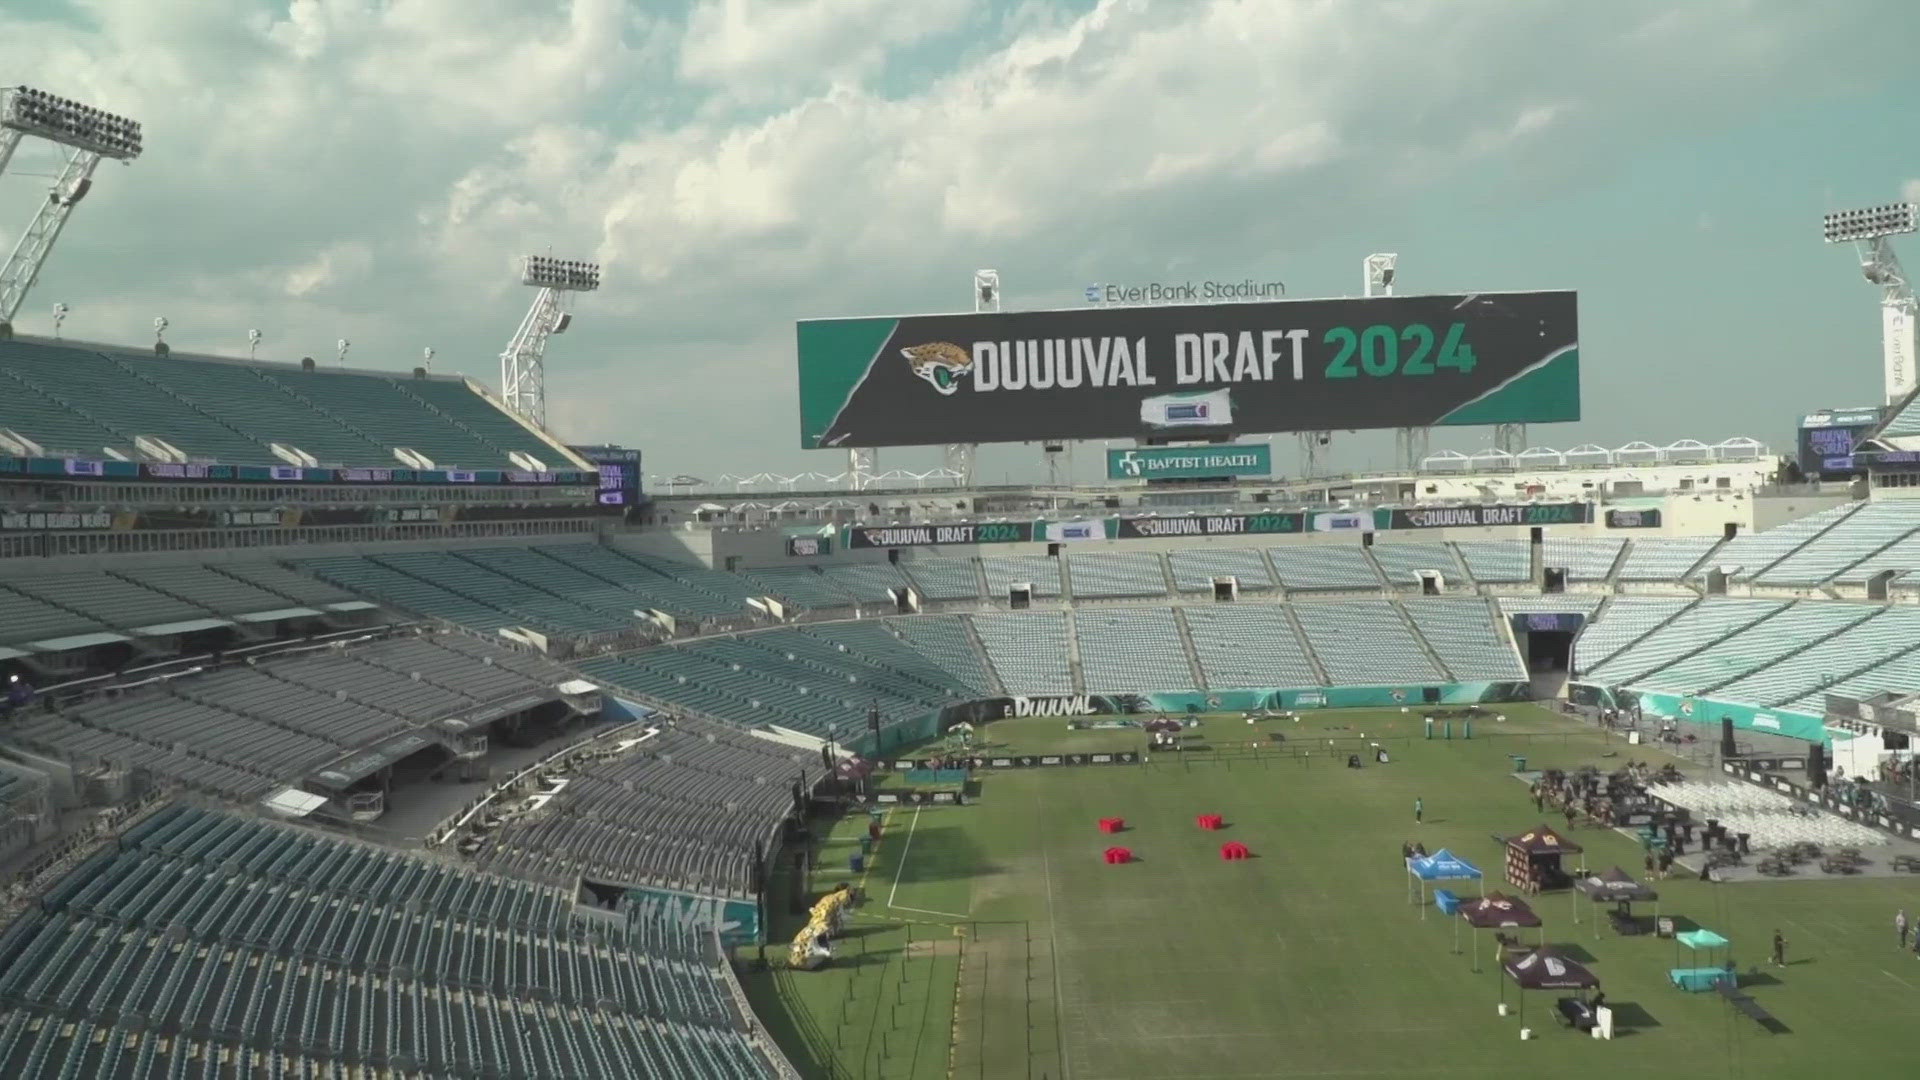 Anthony Austin and Chris Porter are live at EverBank Stadium prior to the Jacksonville Jaguars draft party.